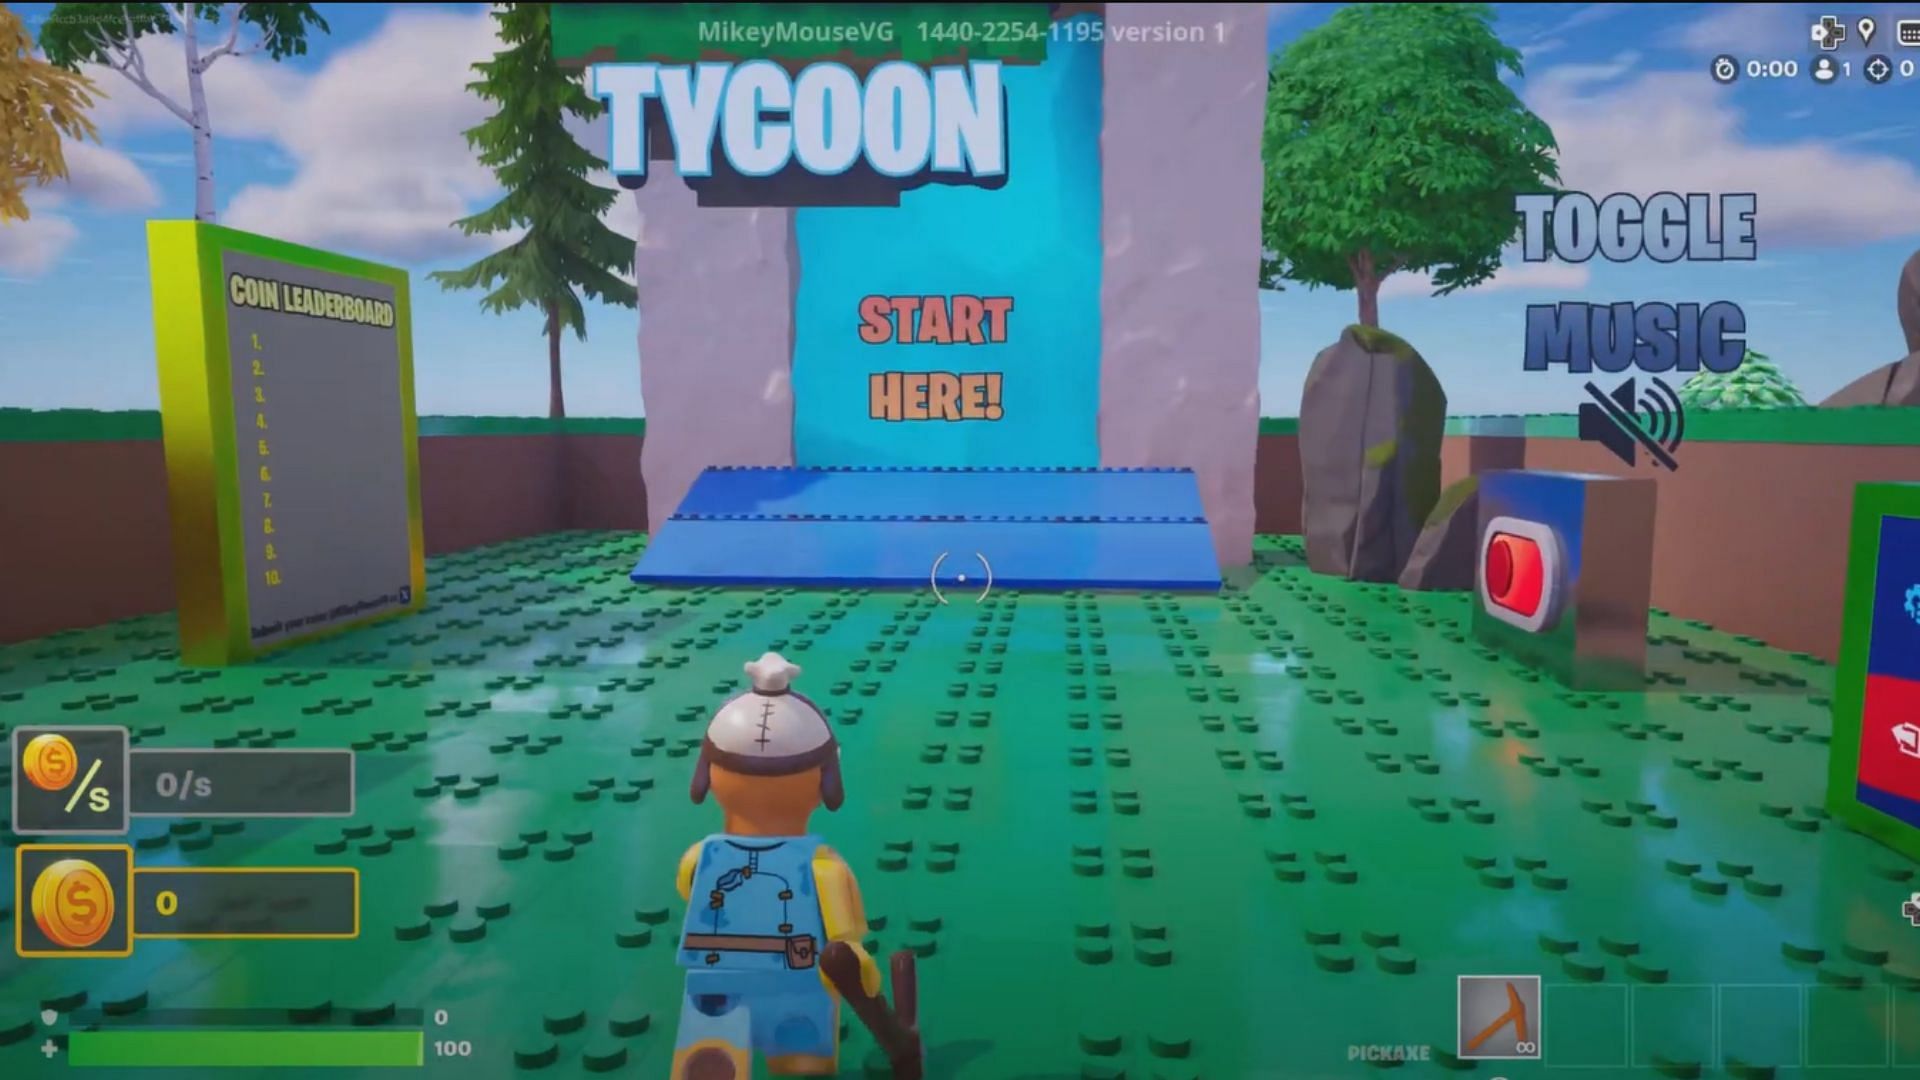 The starting point of the LEGO Skybrick Tycoon map (Image via ESPIRITGAME on YouTube)